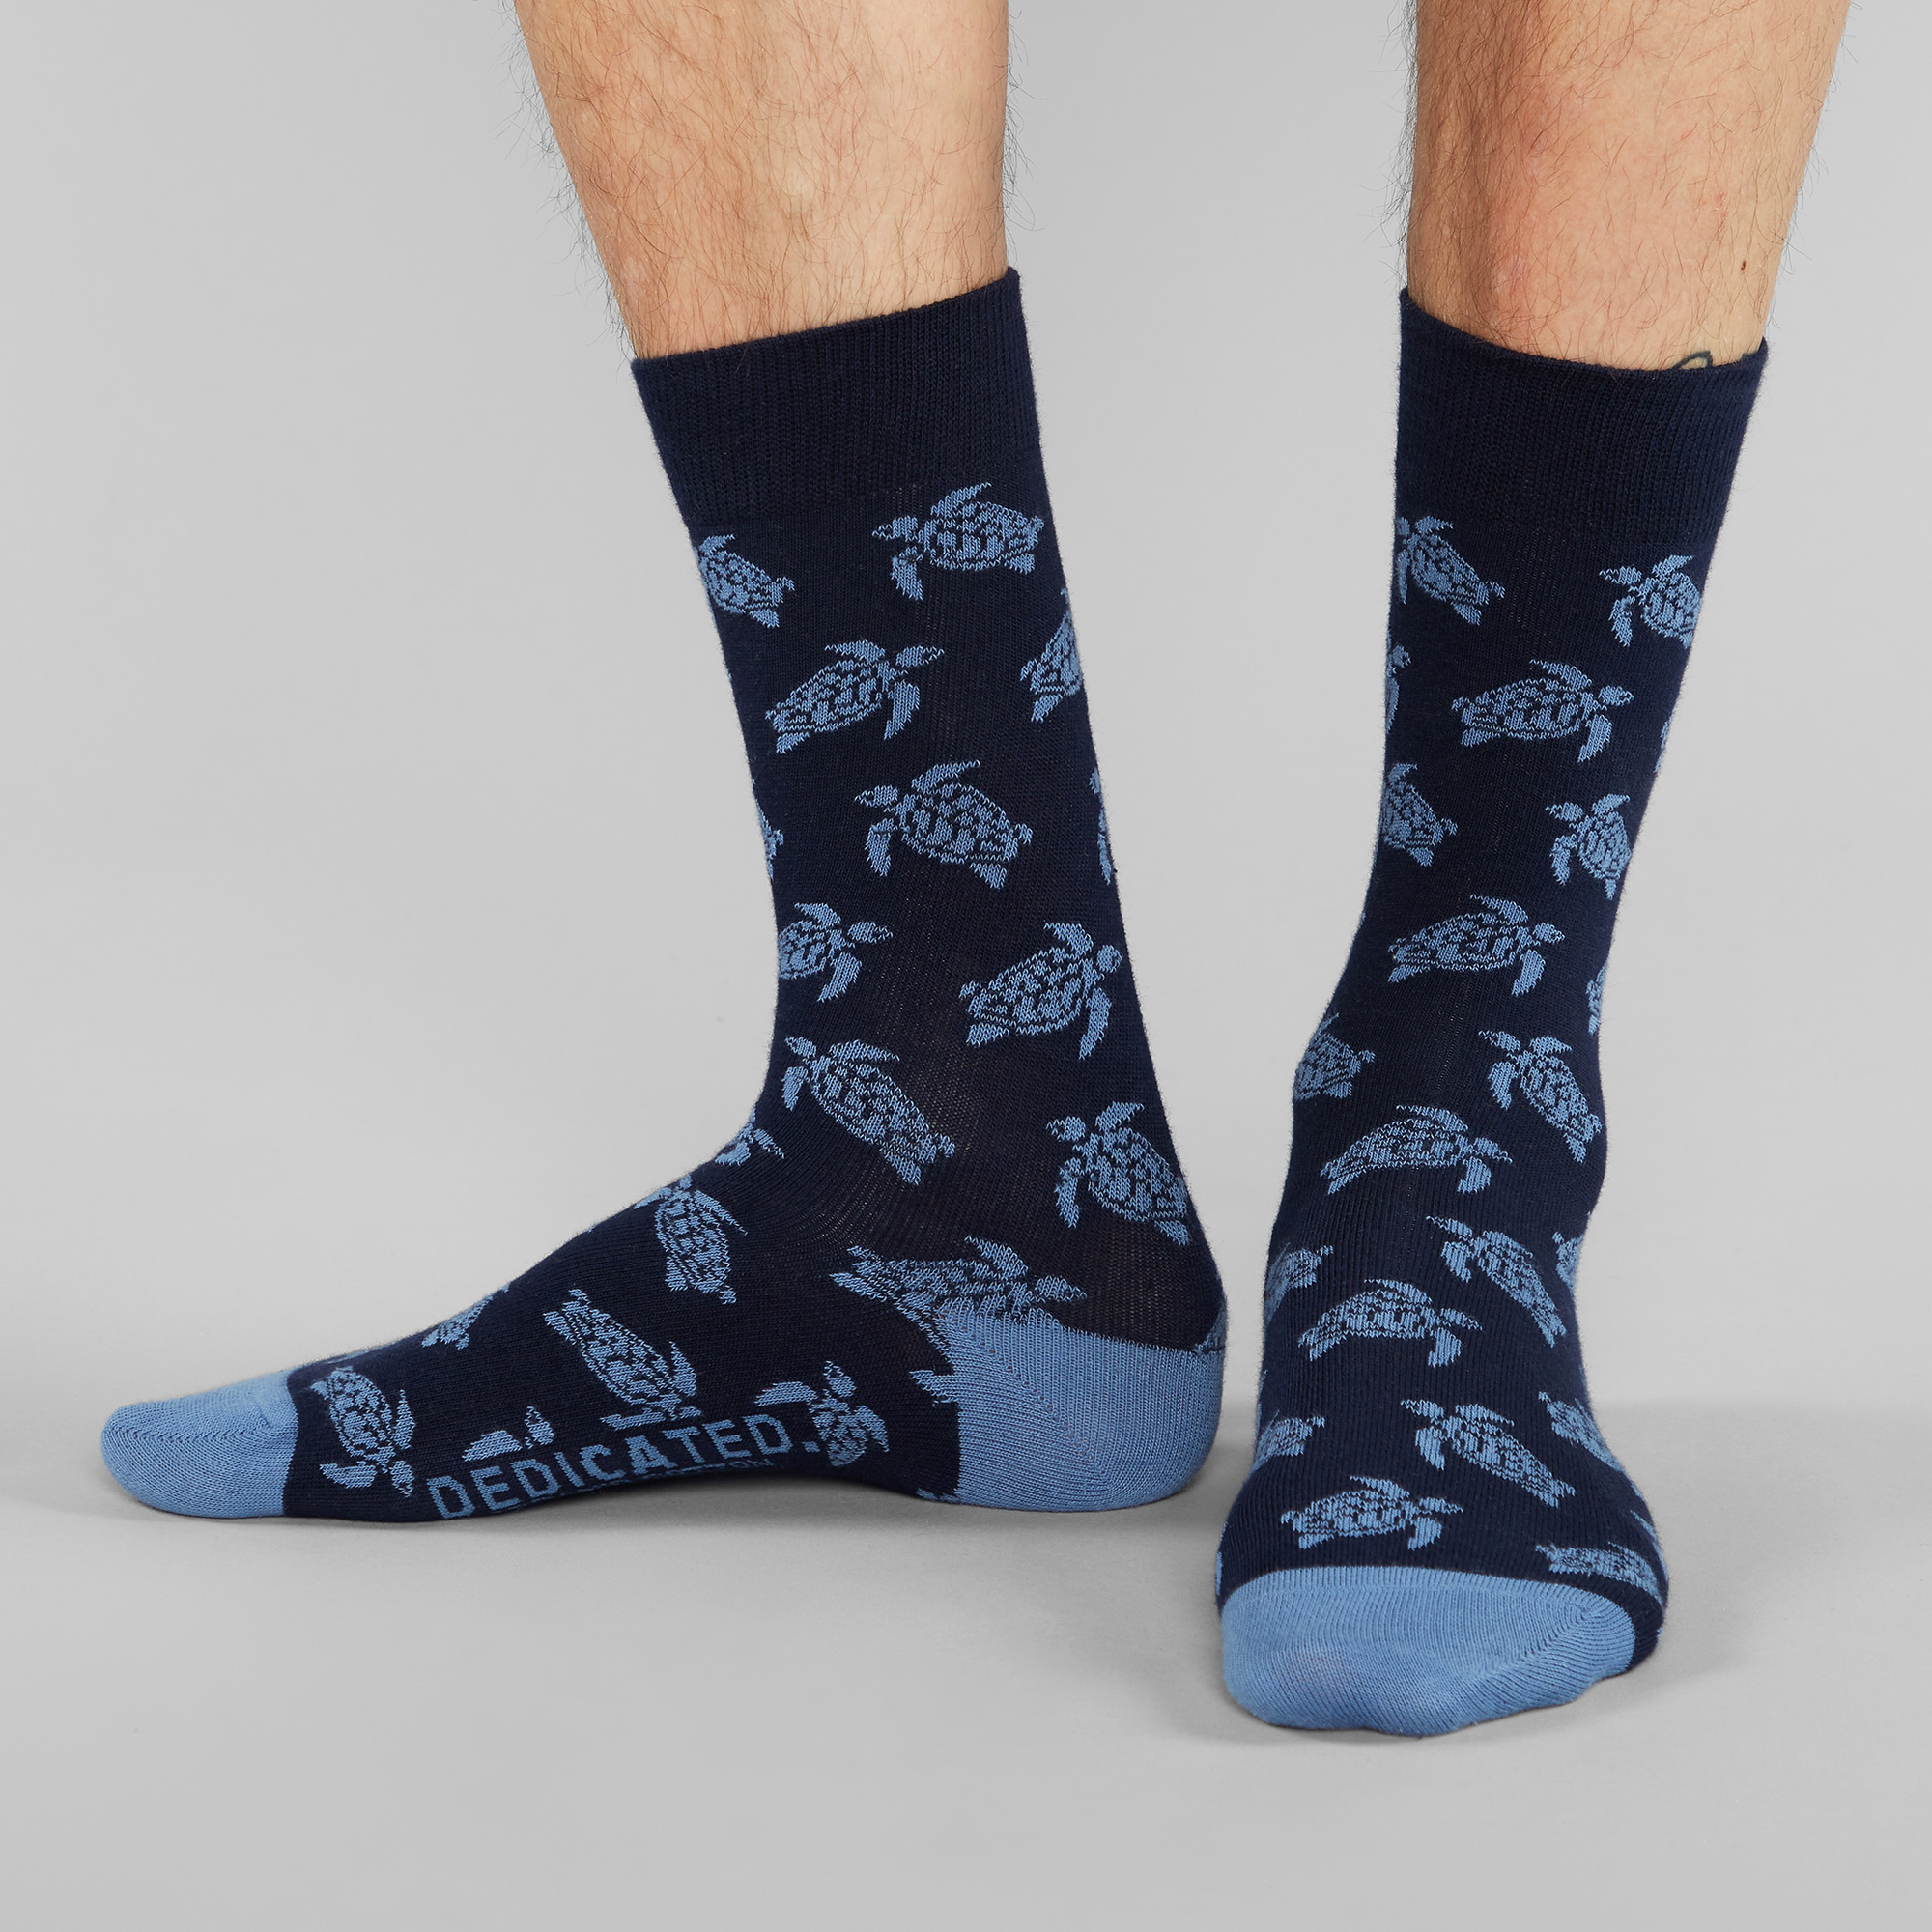 Chaussettes Tortues - Dedicated